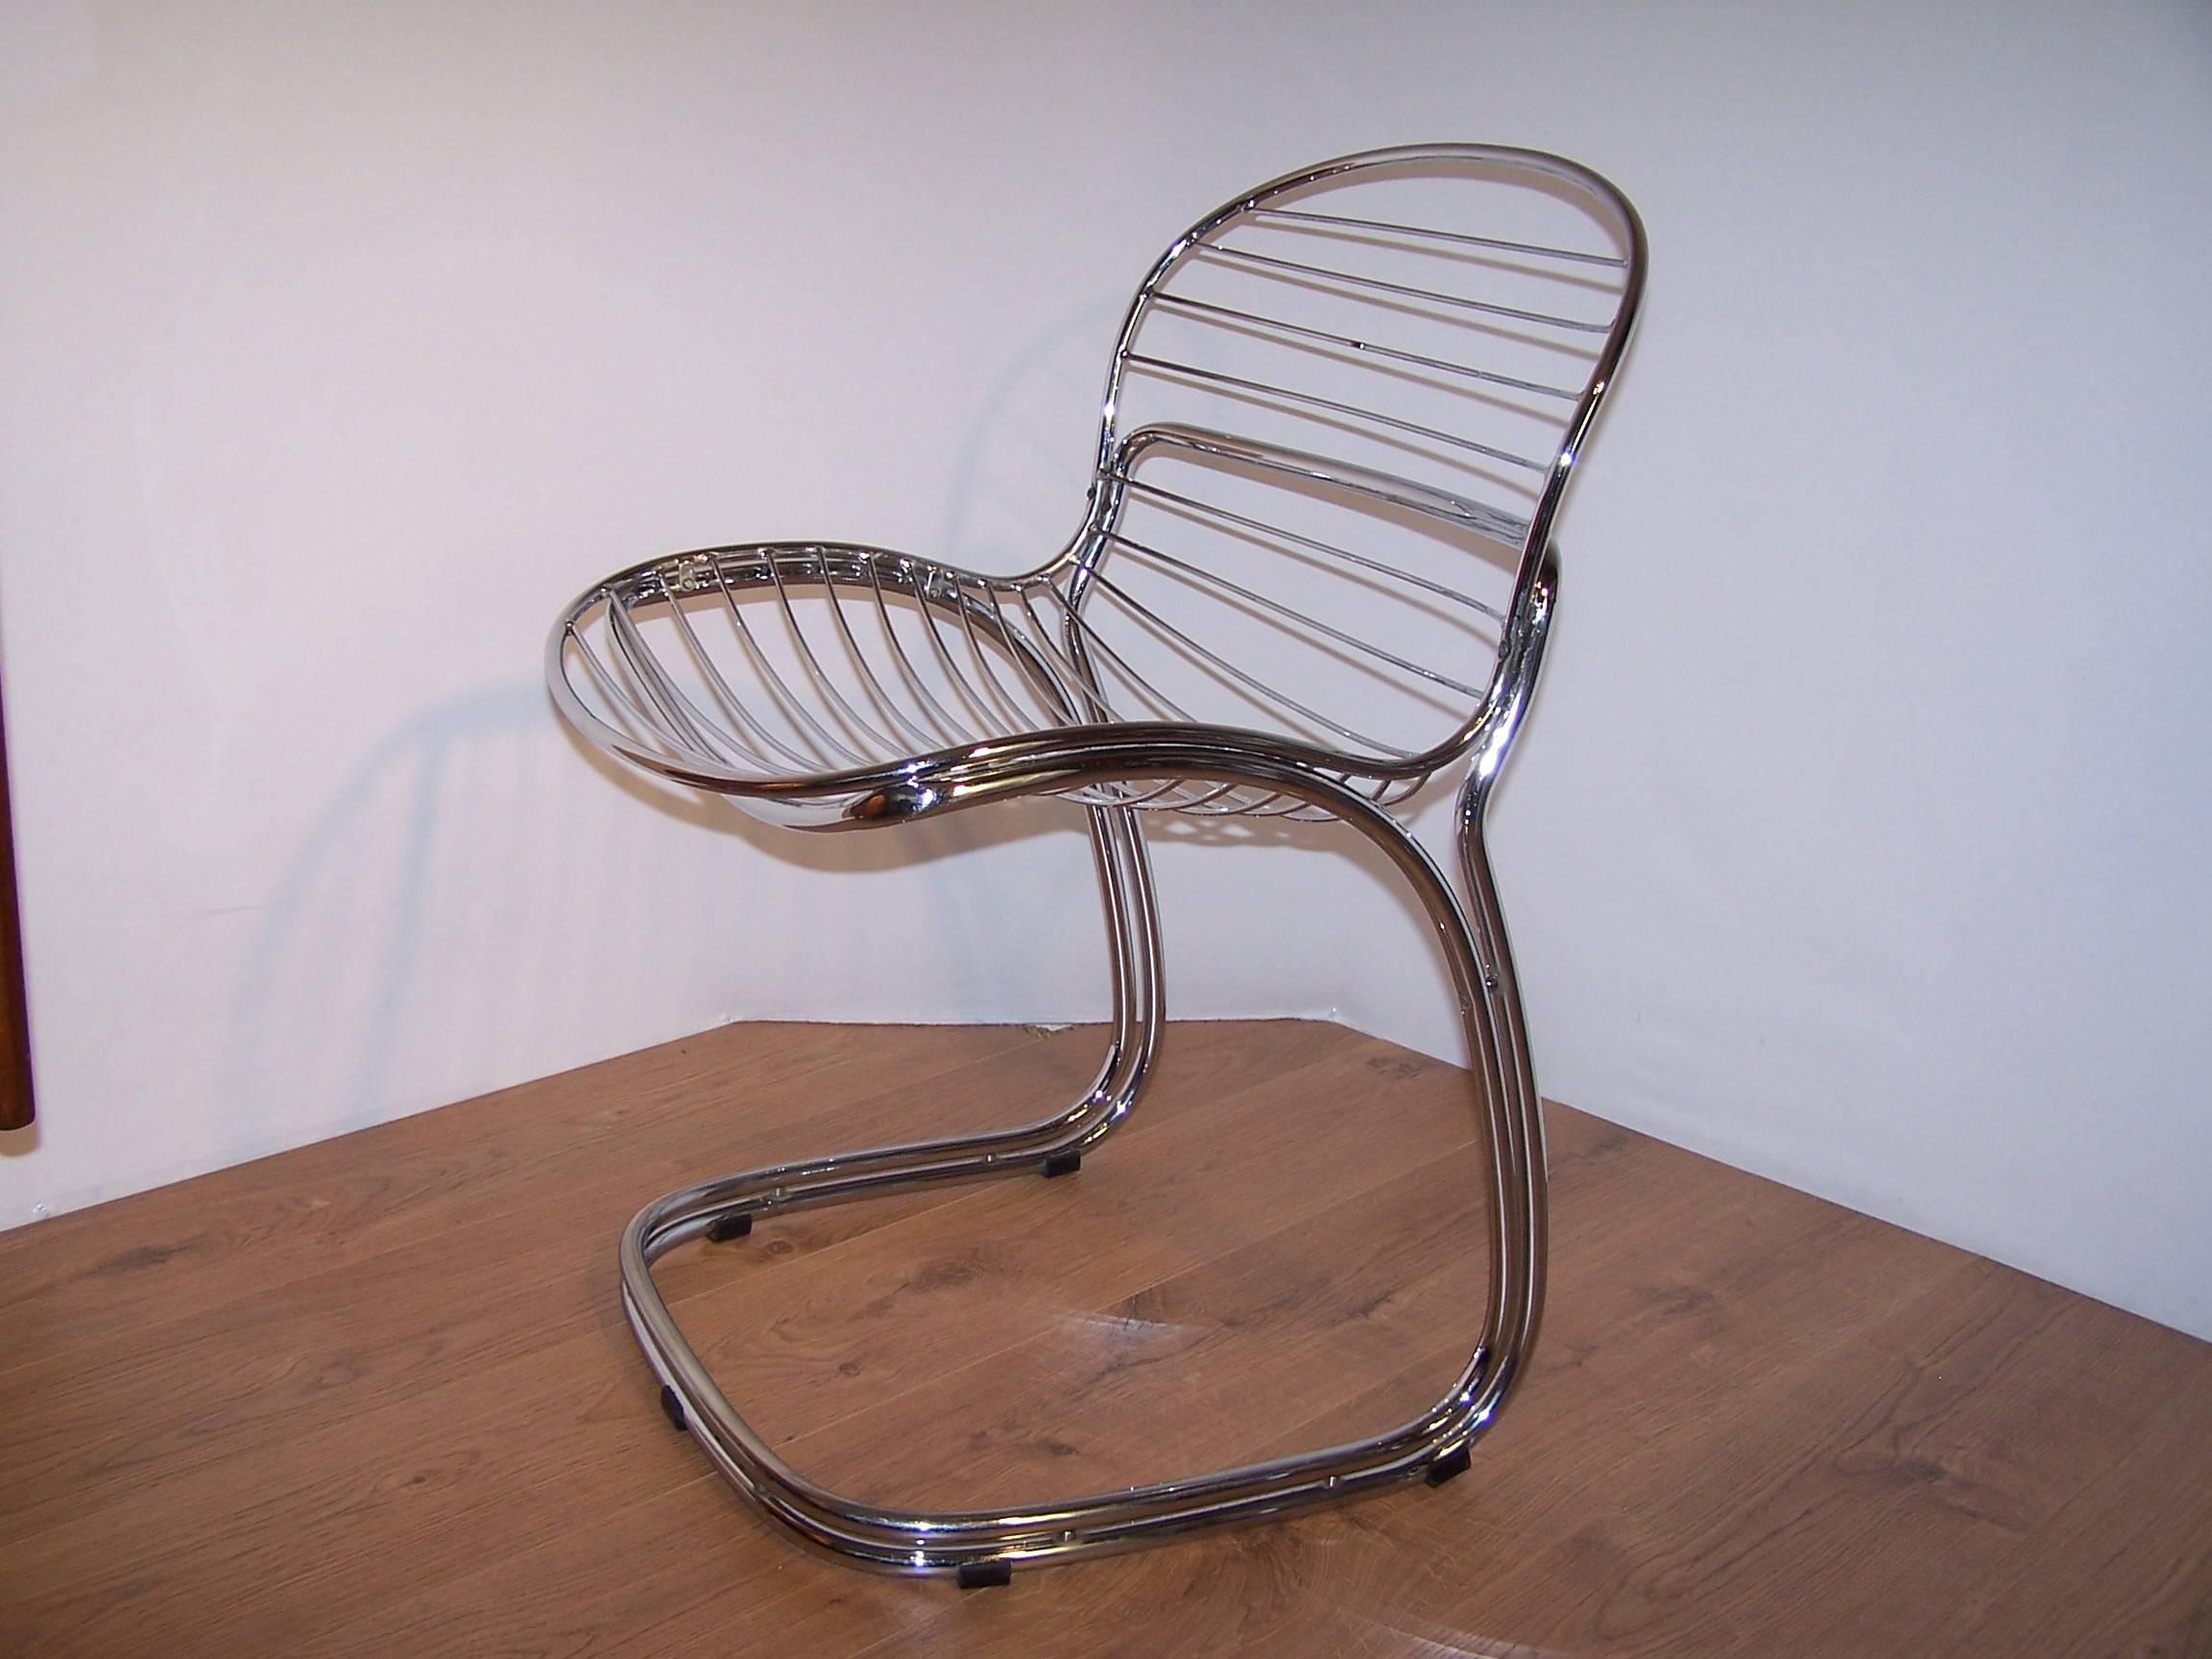 Sabrina chair design by Gastone Rinaldi in the 1970s with chromed tubular structure, in excellent state of conservation.